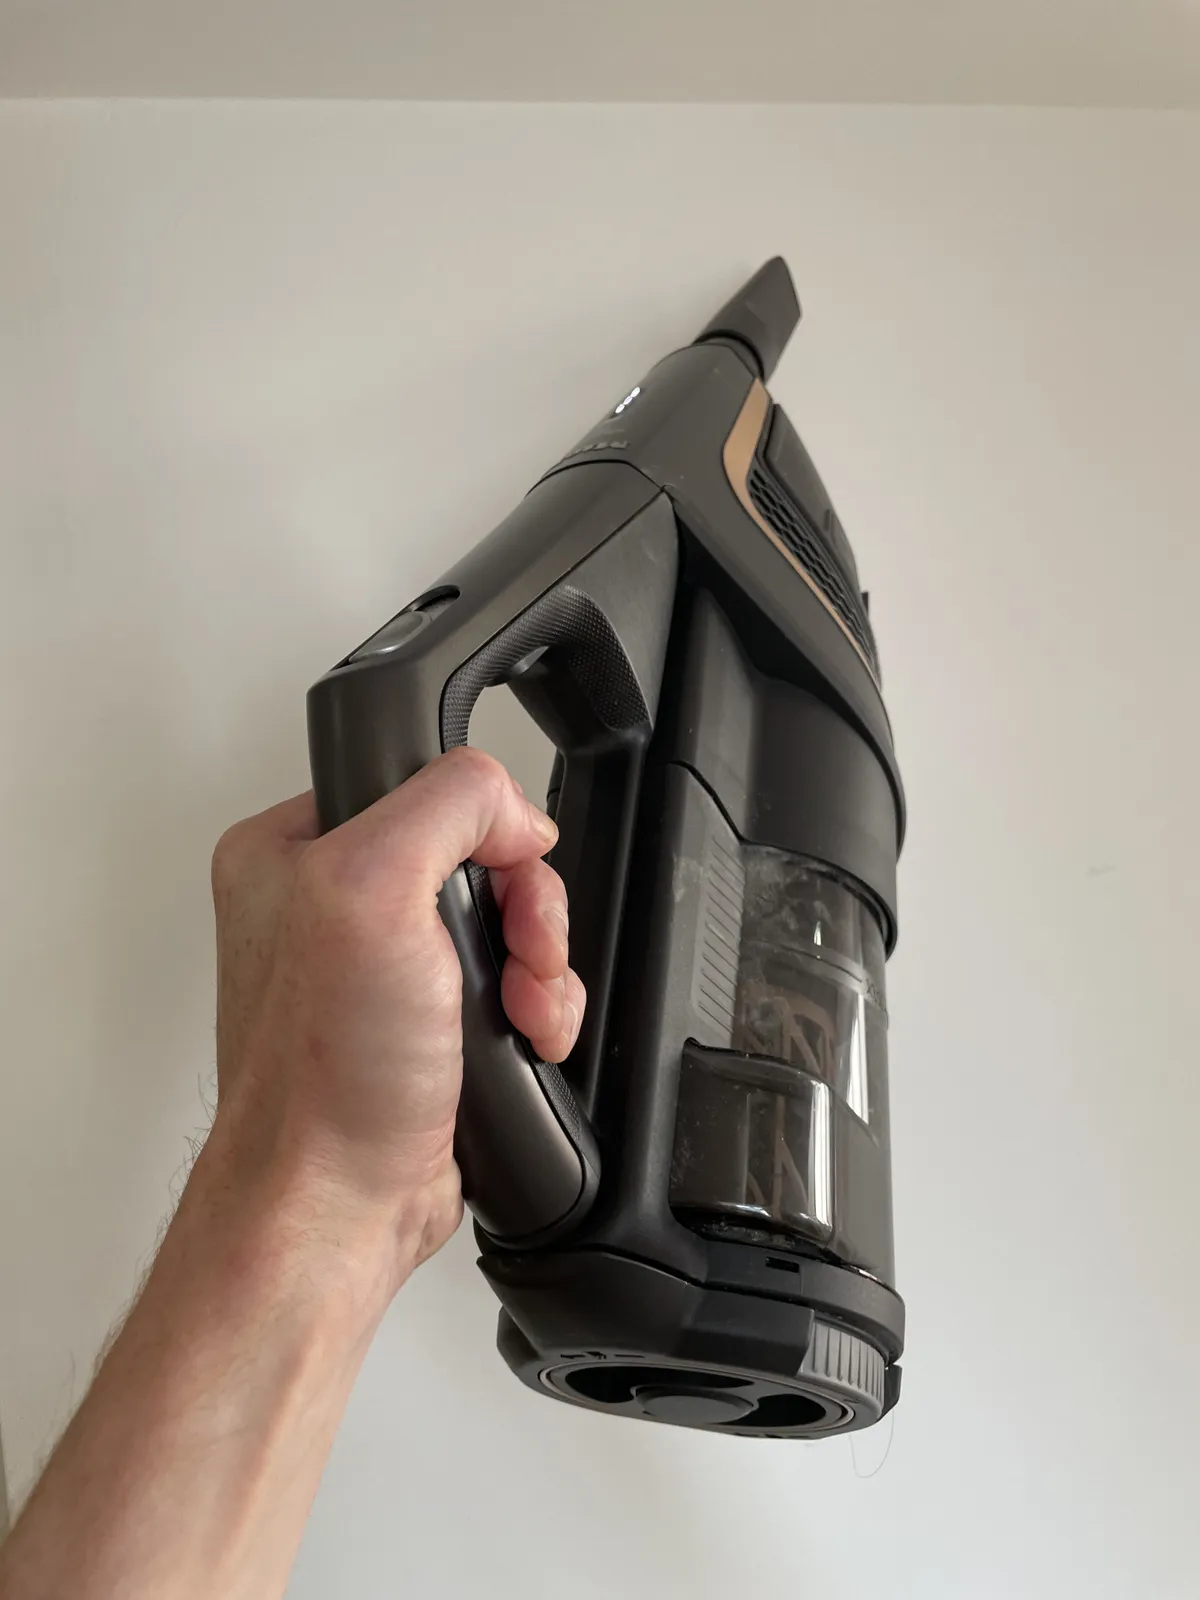 Miele HX2 Pro in handheld mode with crevice nozzle